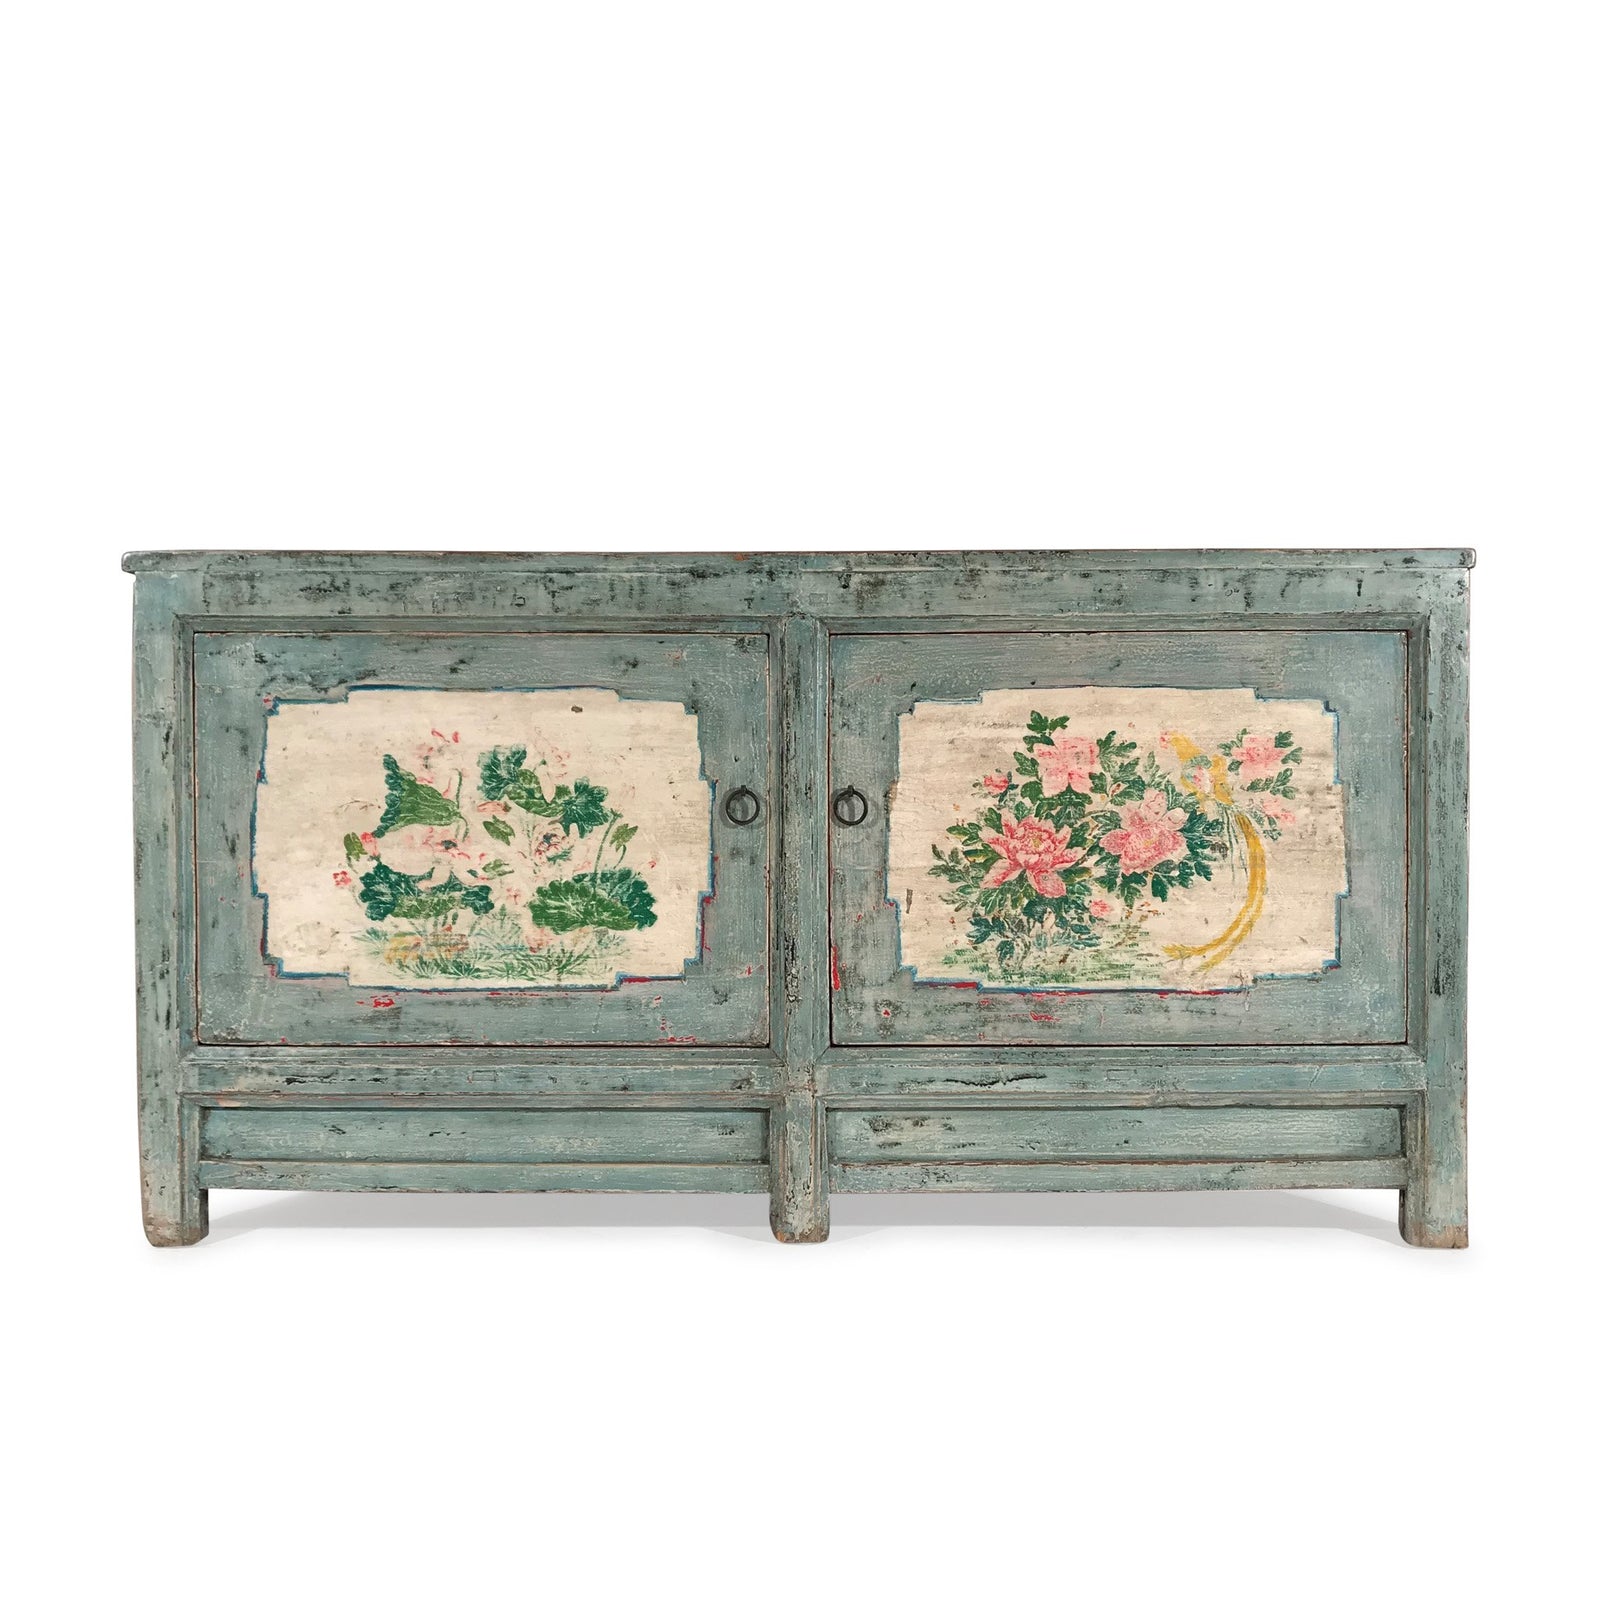 Painted Sideboard From Mongolia - Ca 1920 - 163 x 45 x 85 (wxdxh cms) - C1544